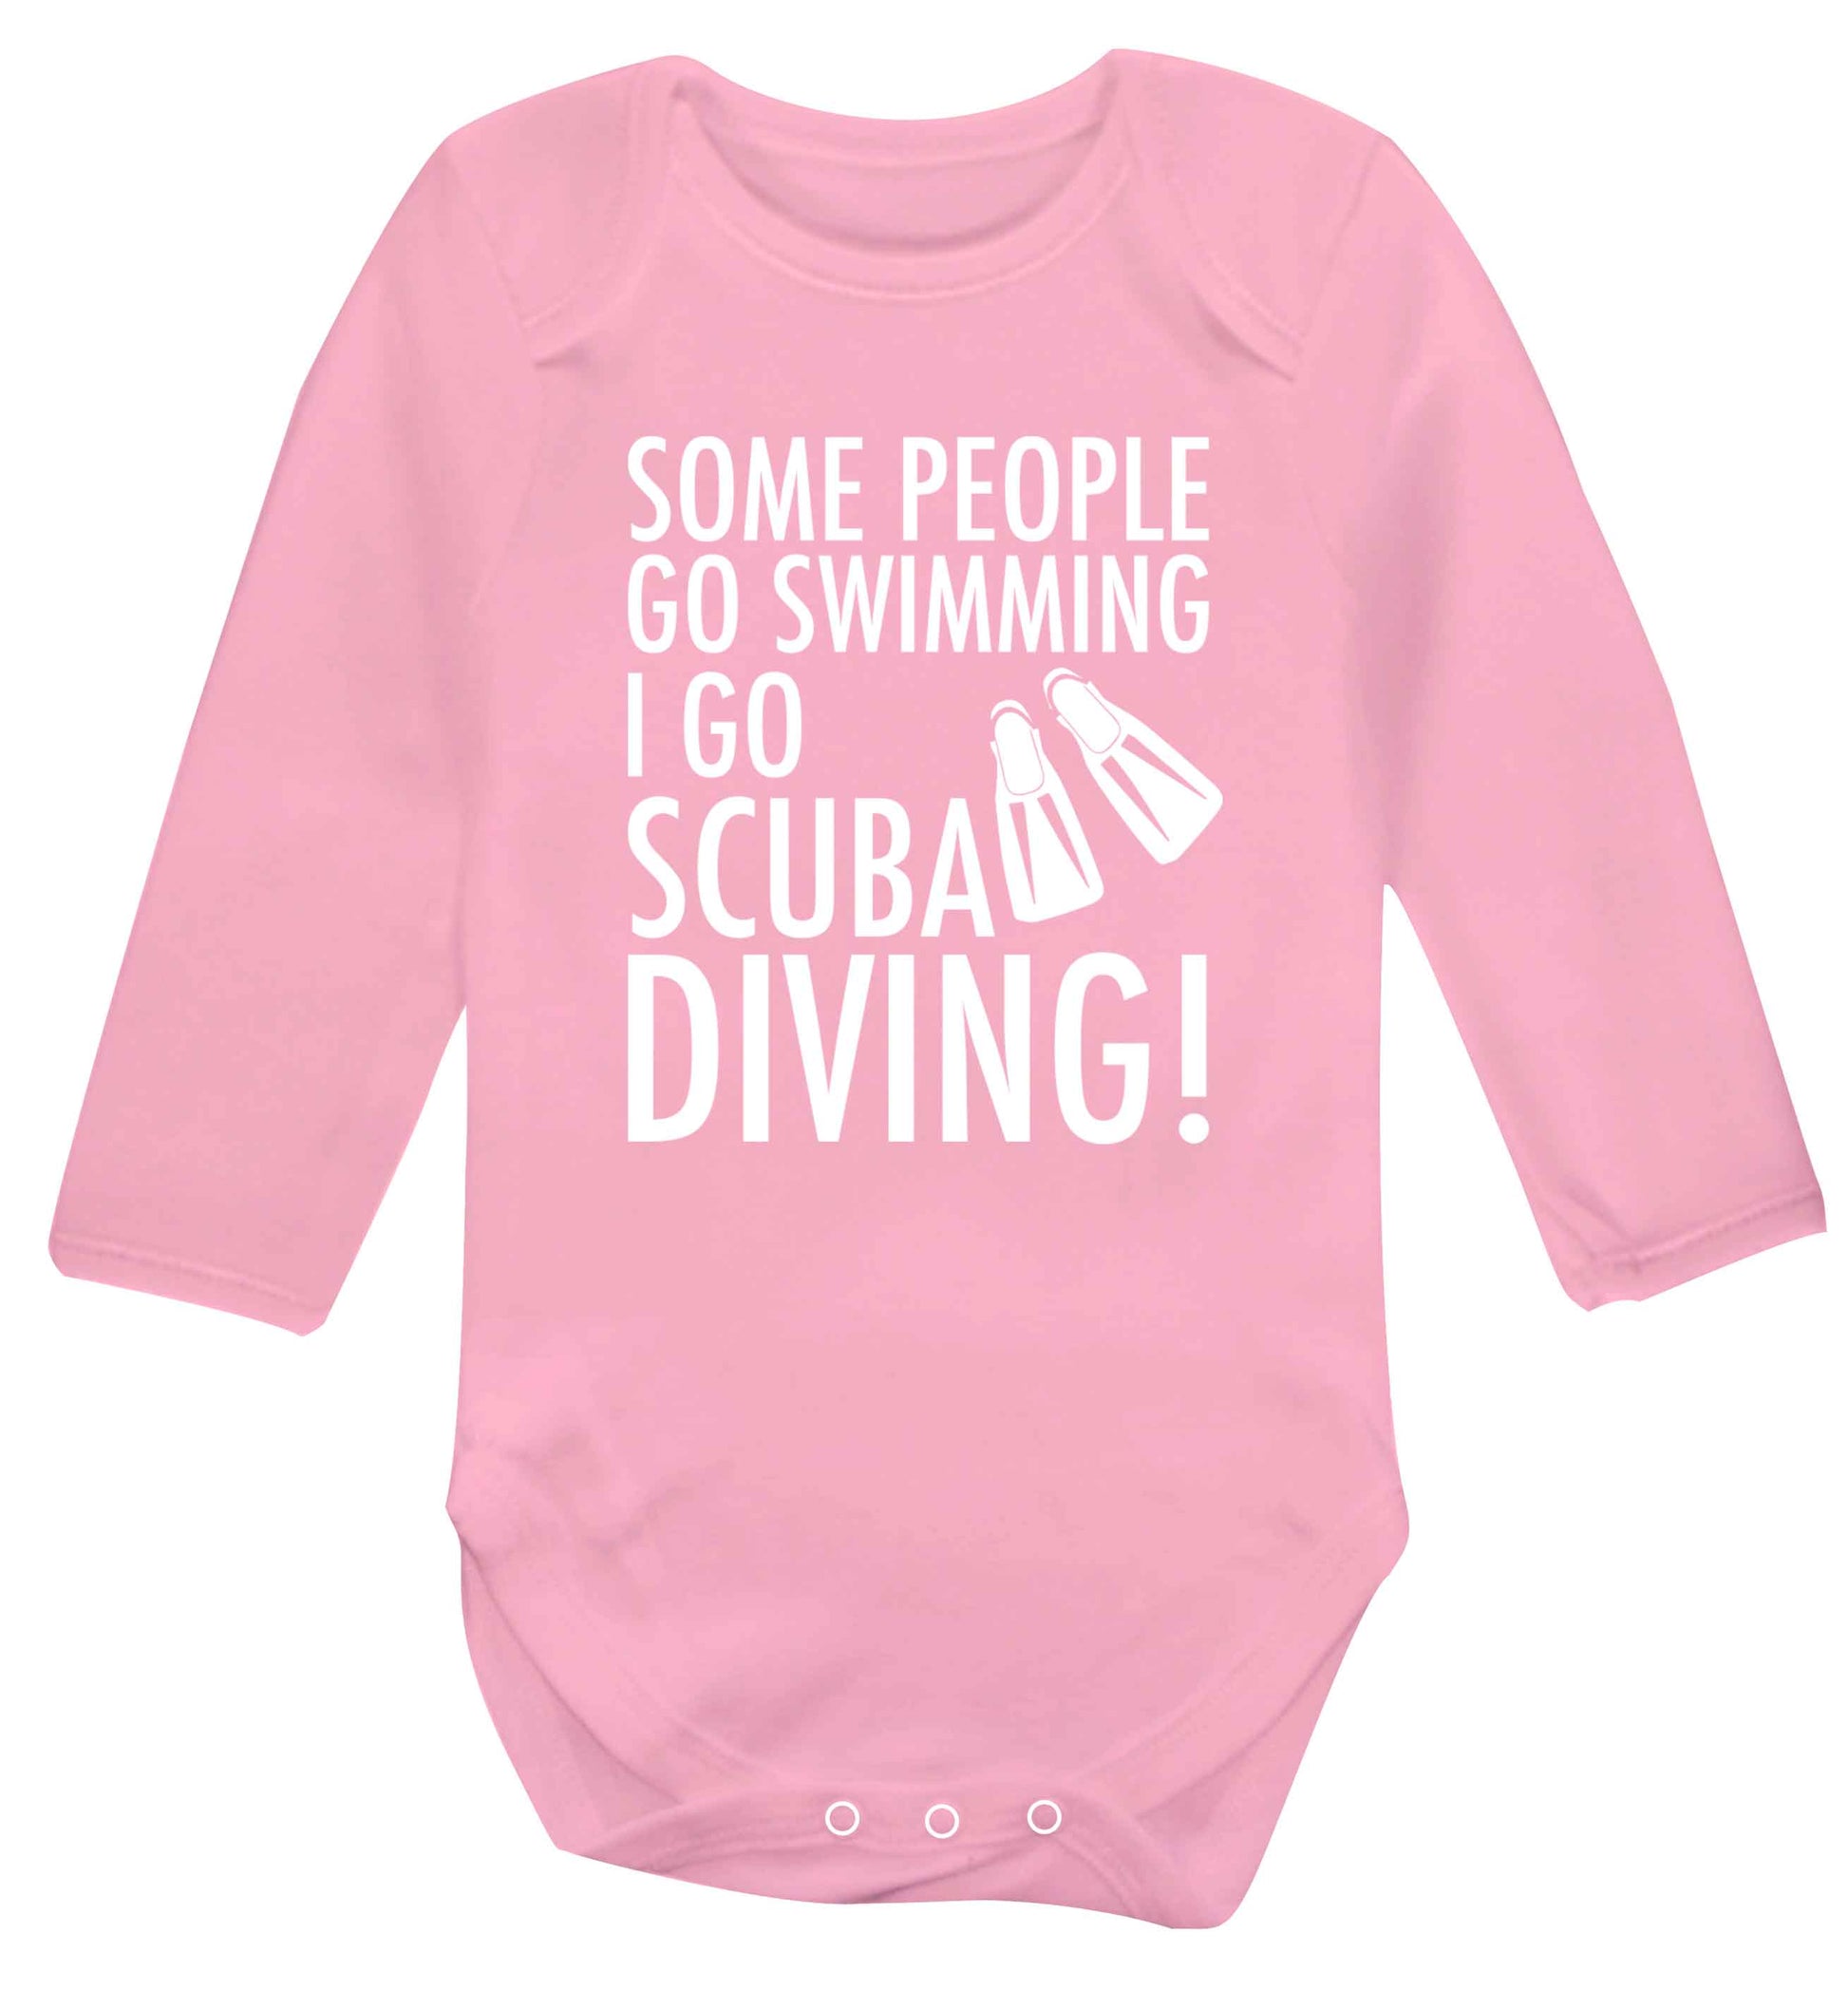 Some people go swimming I go scuba diving! Baby Vest long sleeved pale pink 6-12 months